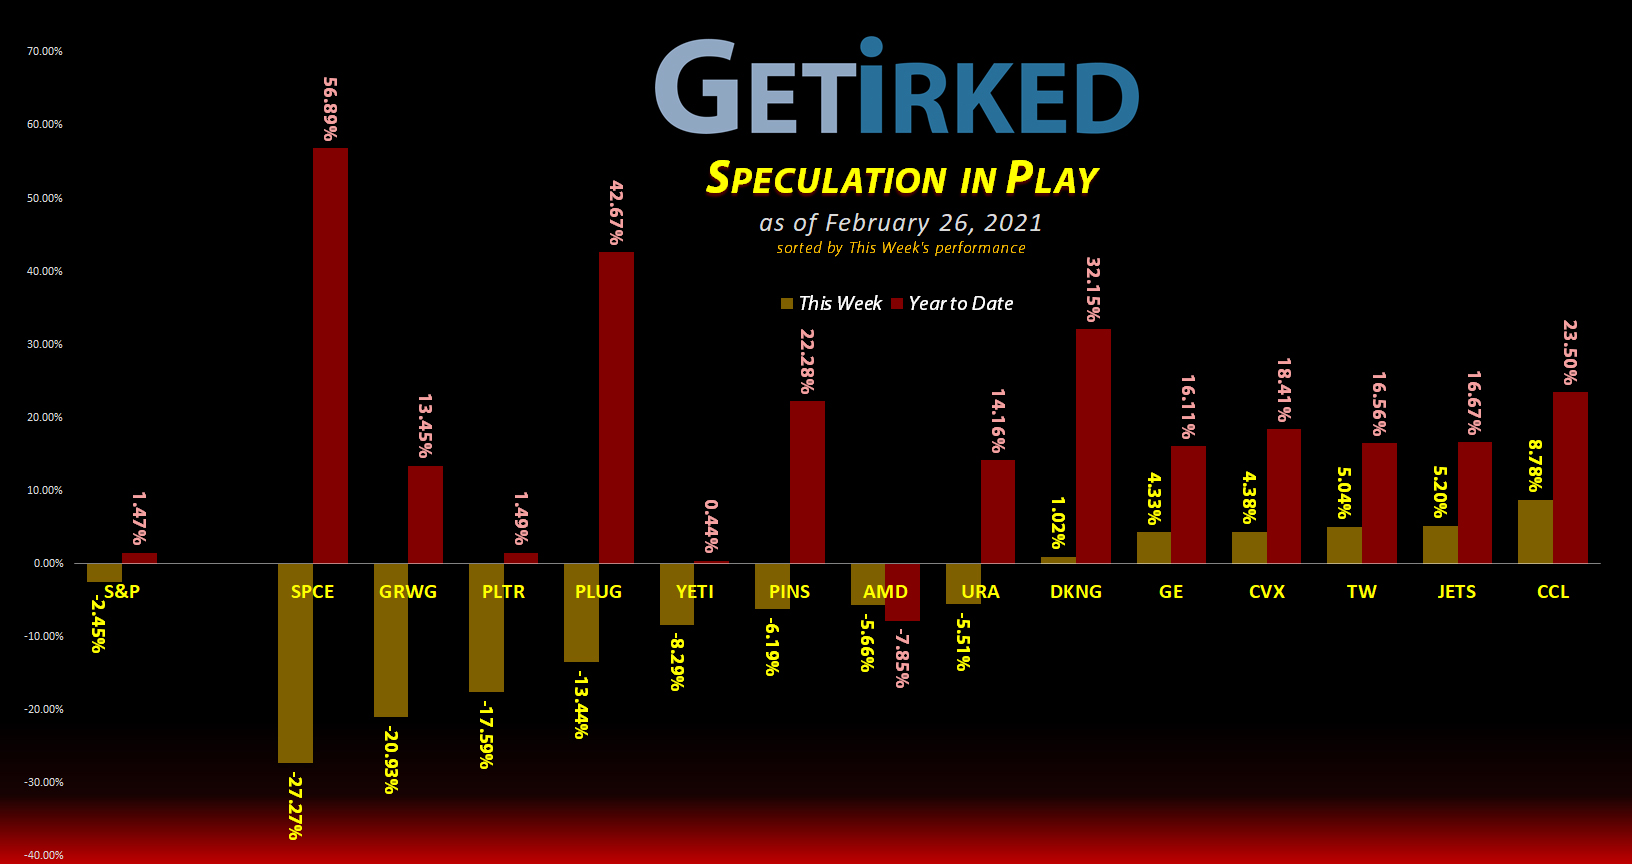 Get Irked's Speculation in Play - February 26, 2021